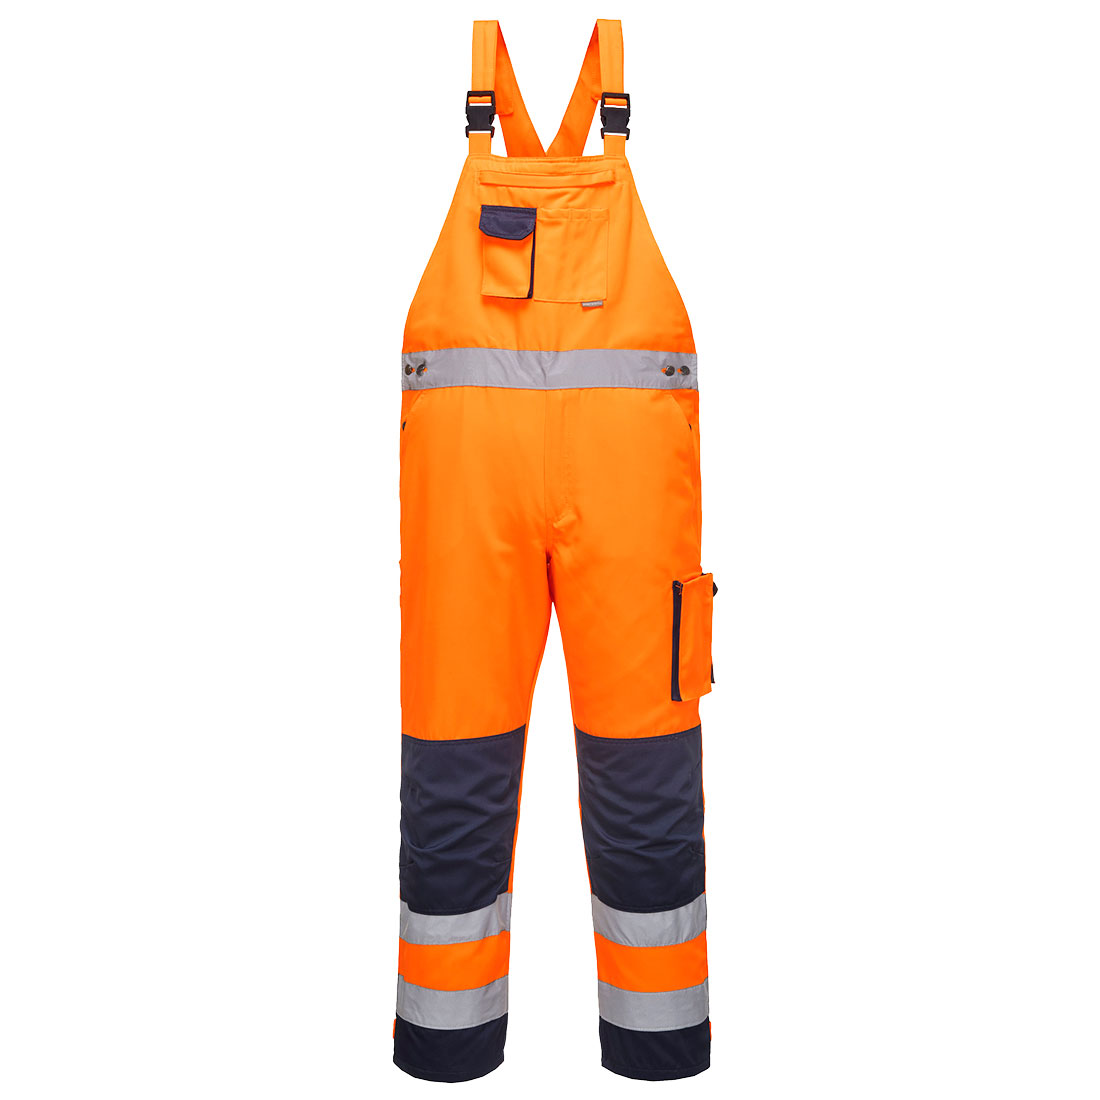 Hi-Vis Moden Style Bib and Brace with Texpel stain resistant finished